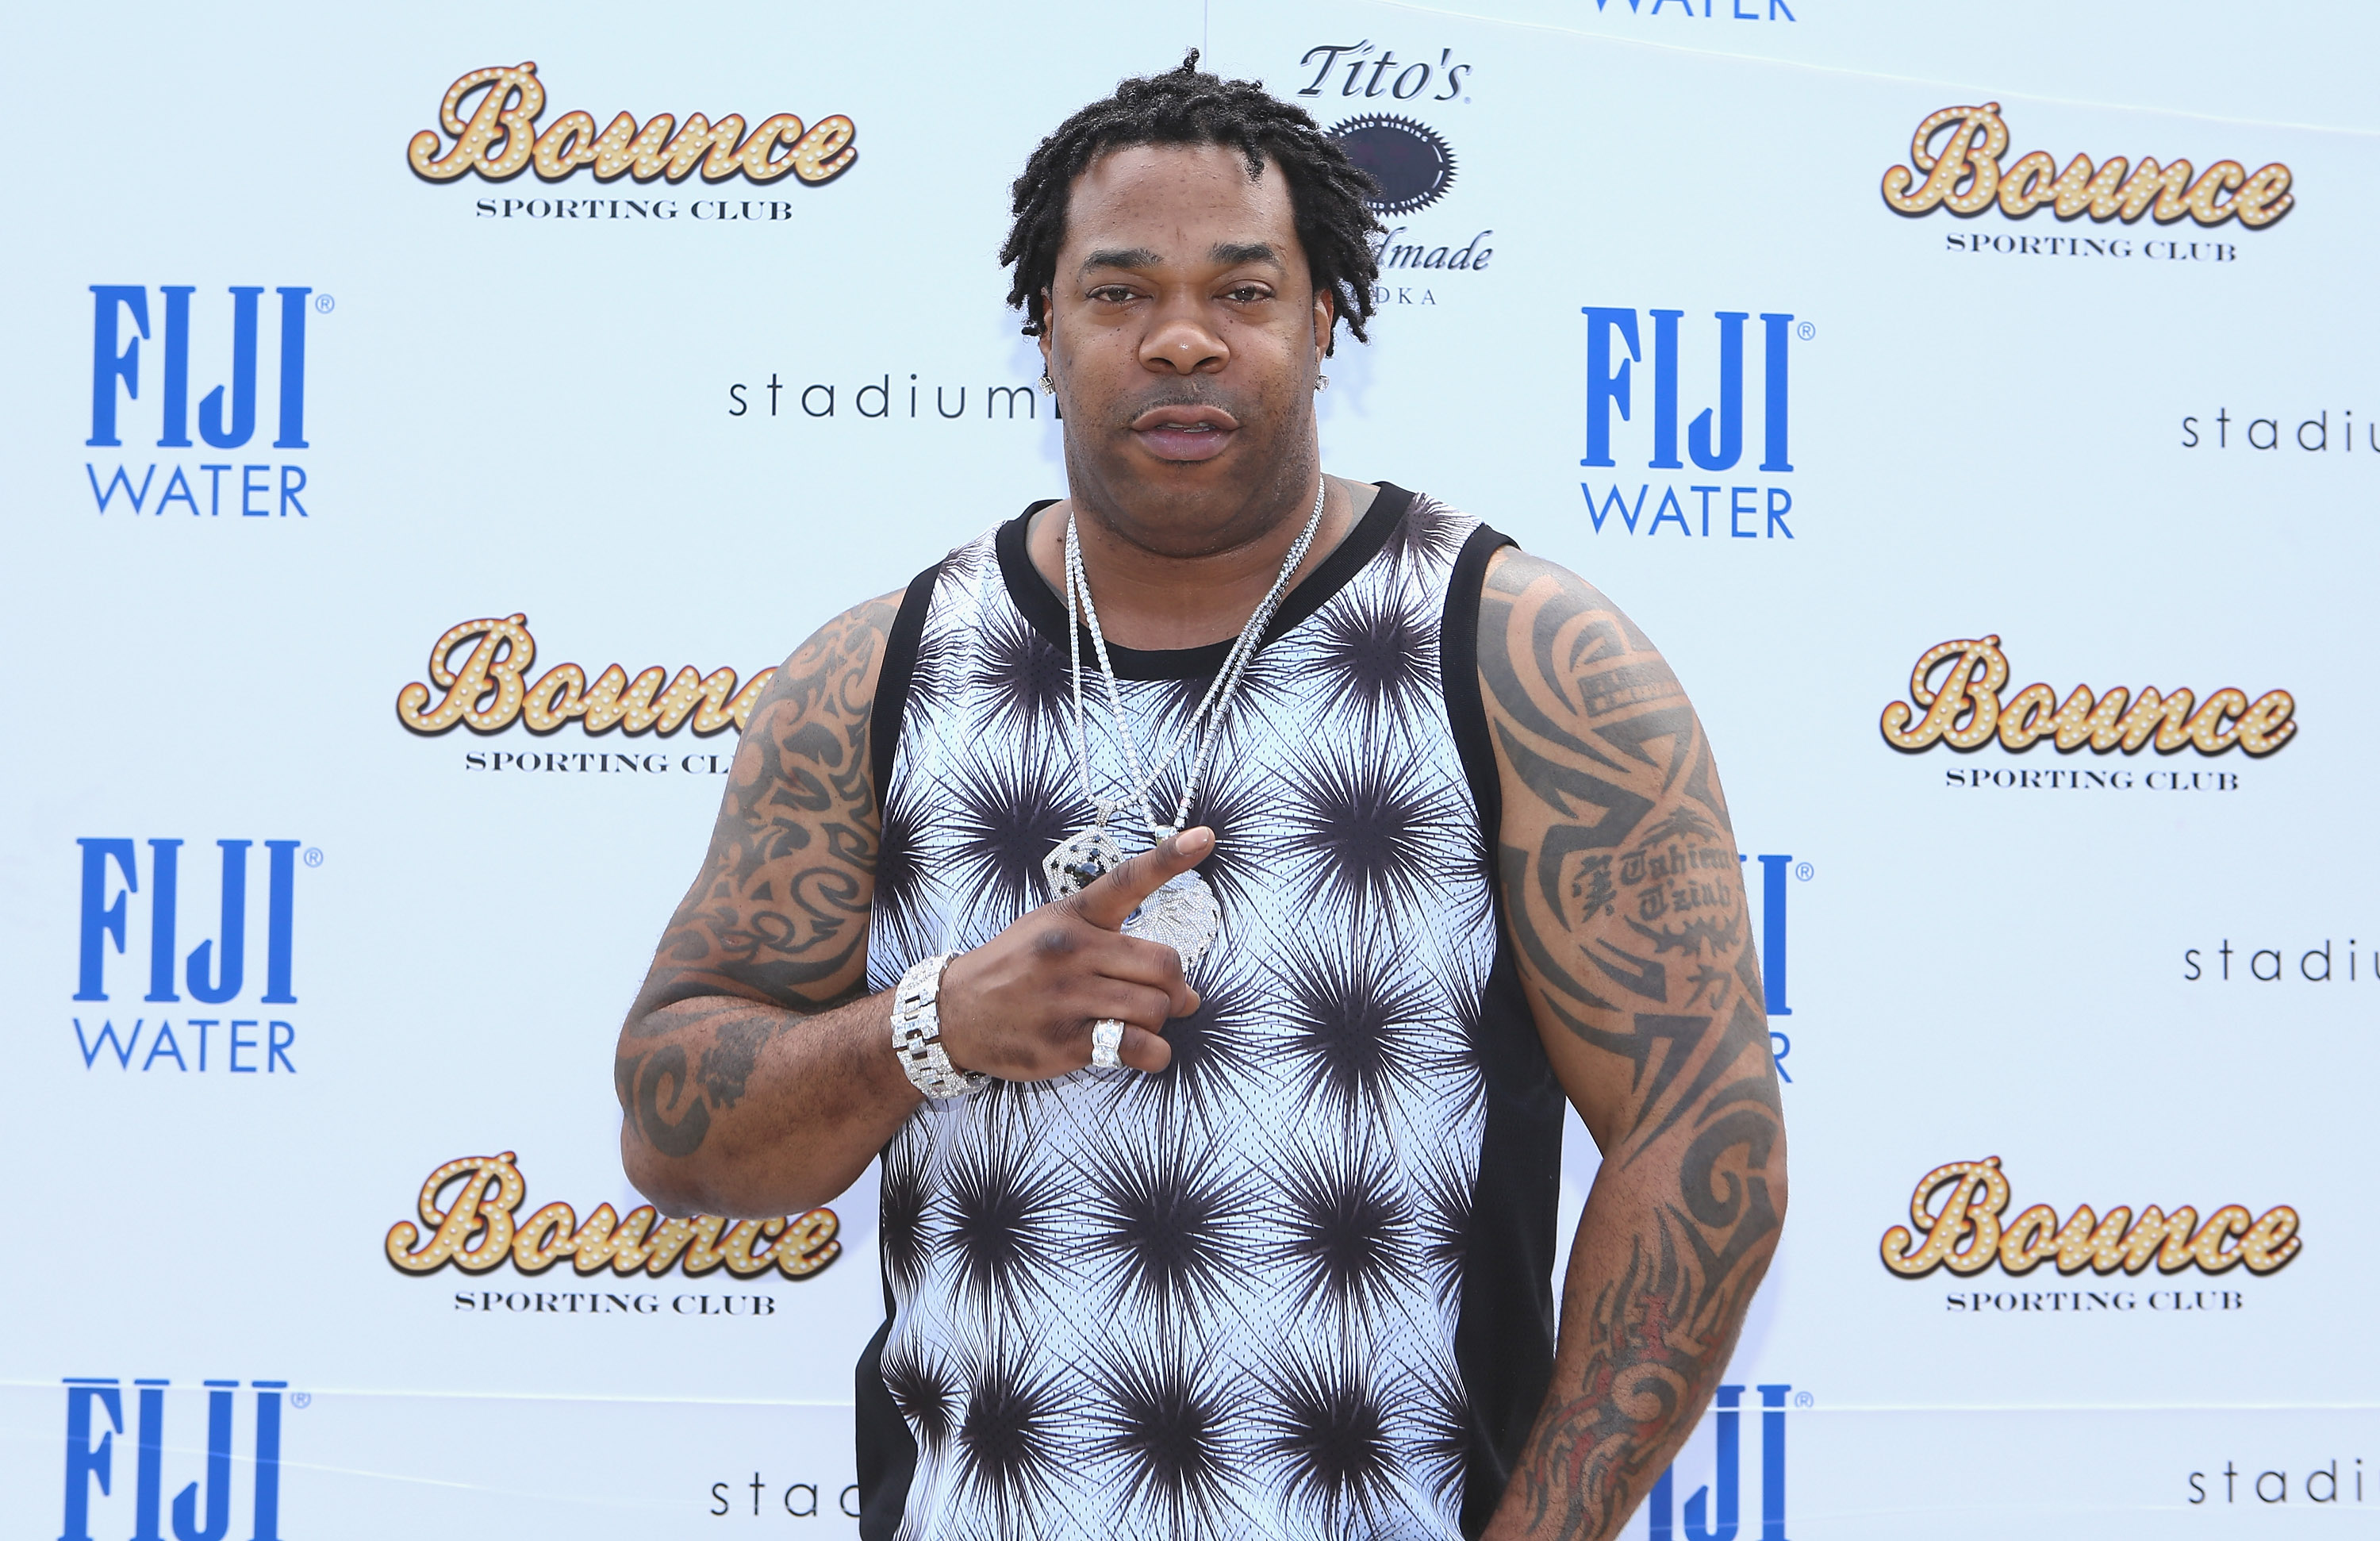 Busta Rhymes attends the Bounce Sporting Club World Cup Viewing Party at Stadium Red on July 13, 2014, in Sag Harbor, New York. | Source: Getty Images